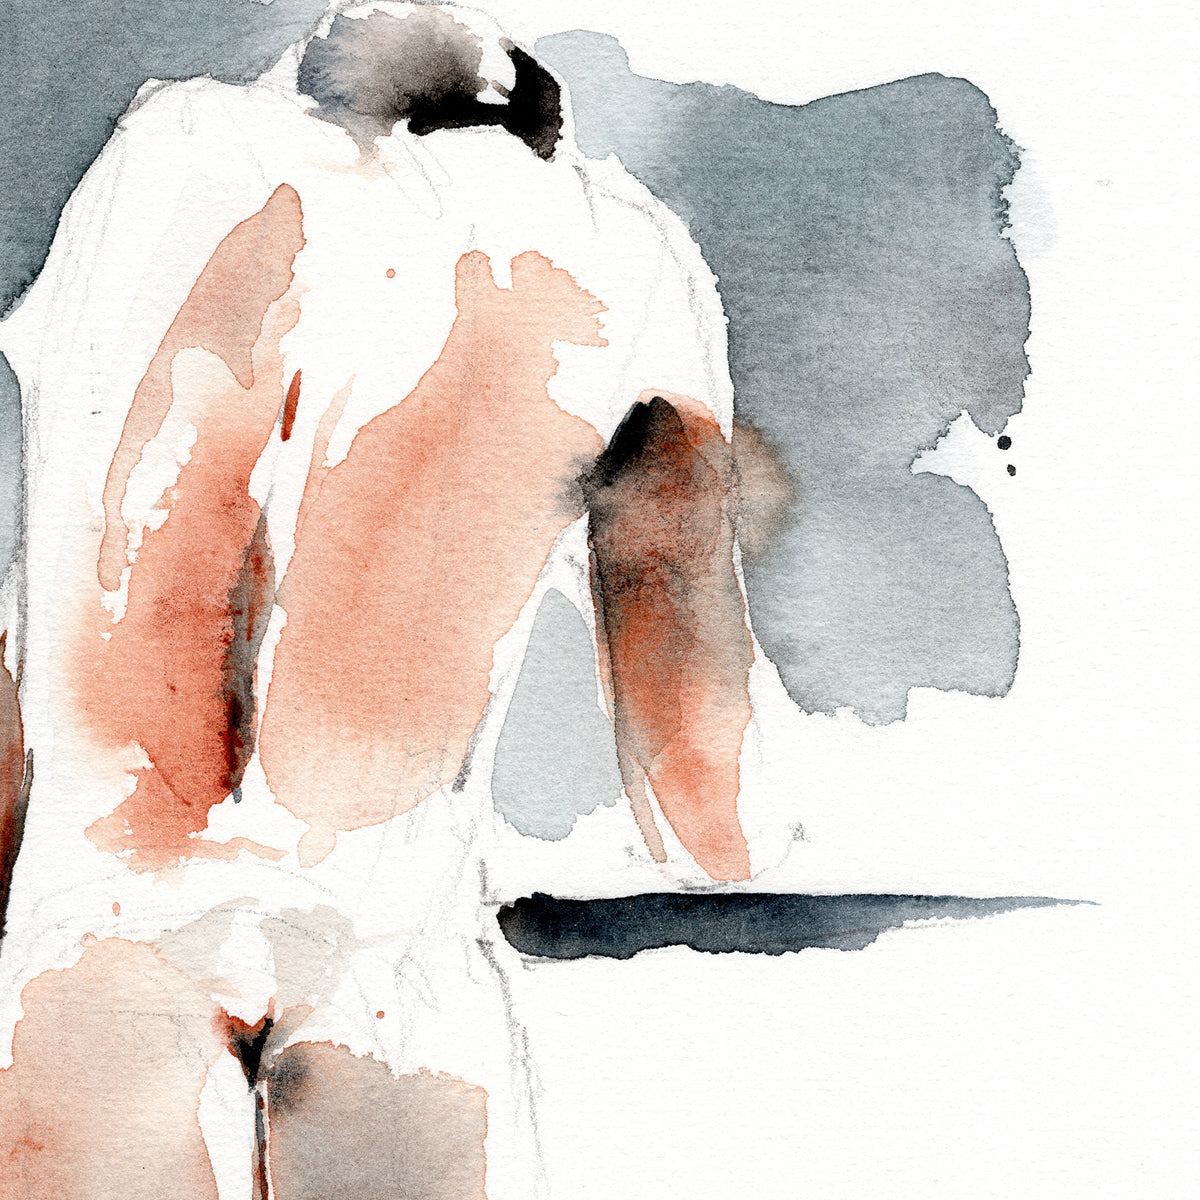 Male Figure with Defined Back Muscles - 6x9" Original Painting